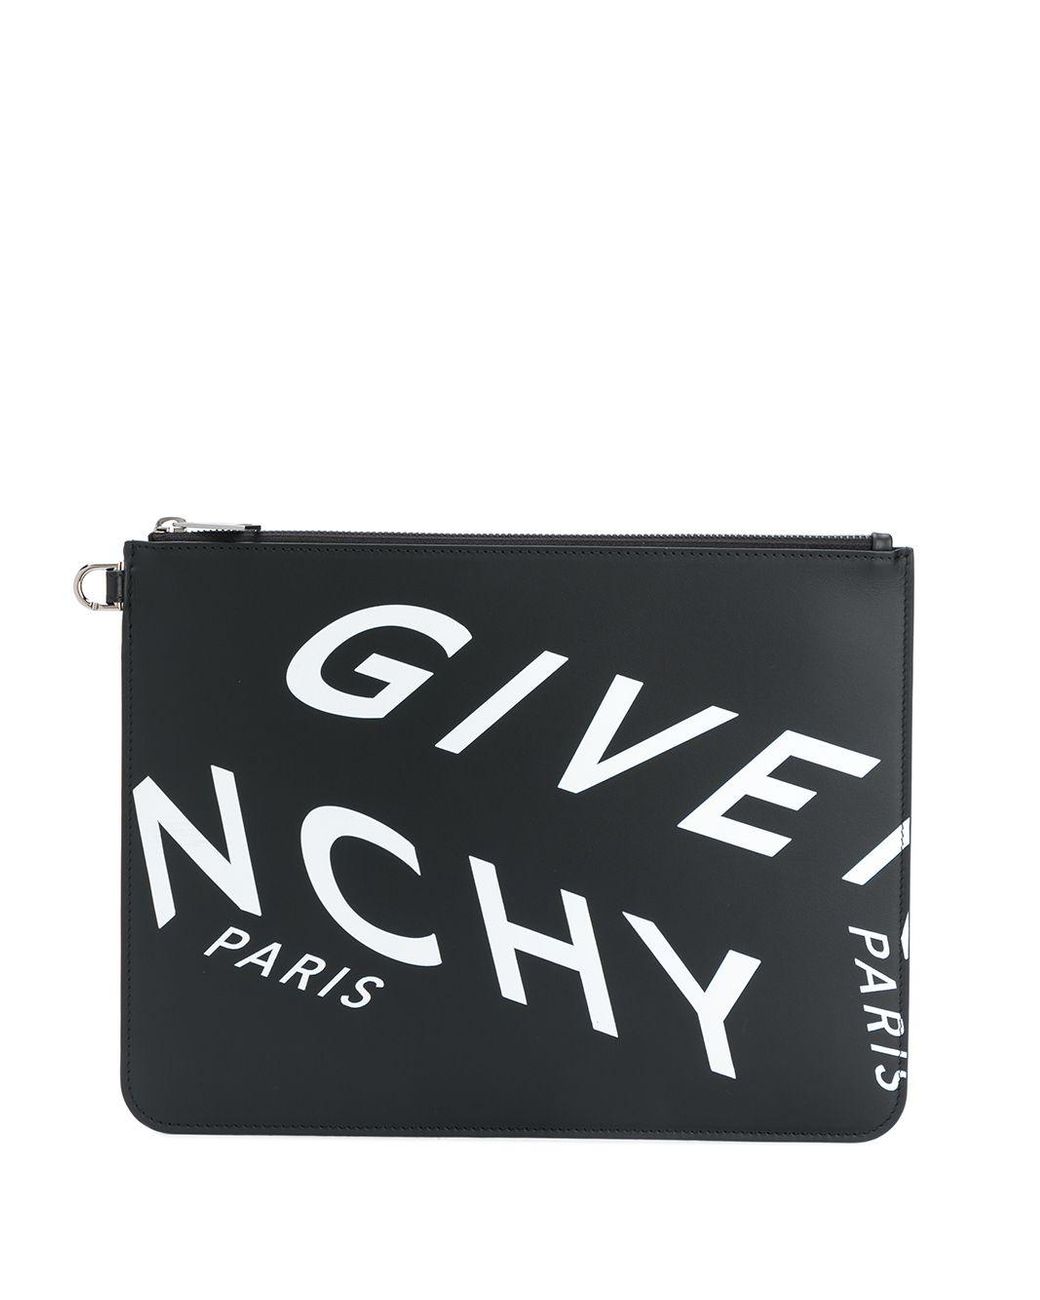 Givenchy Large Zipped Leather Pouch in Black for Men - Save 25% - Lyst